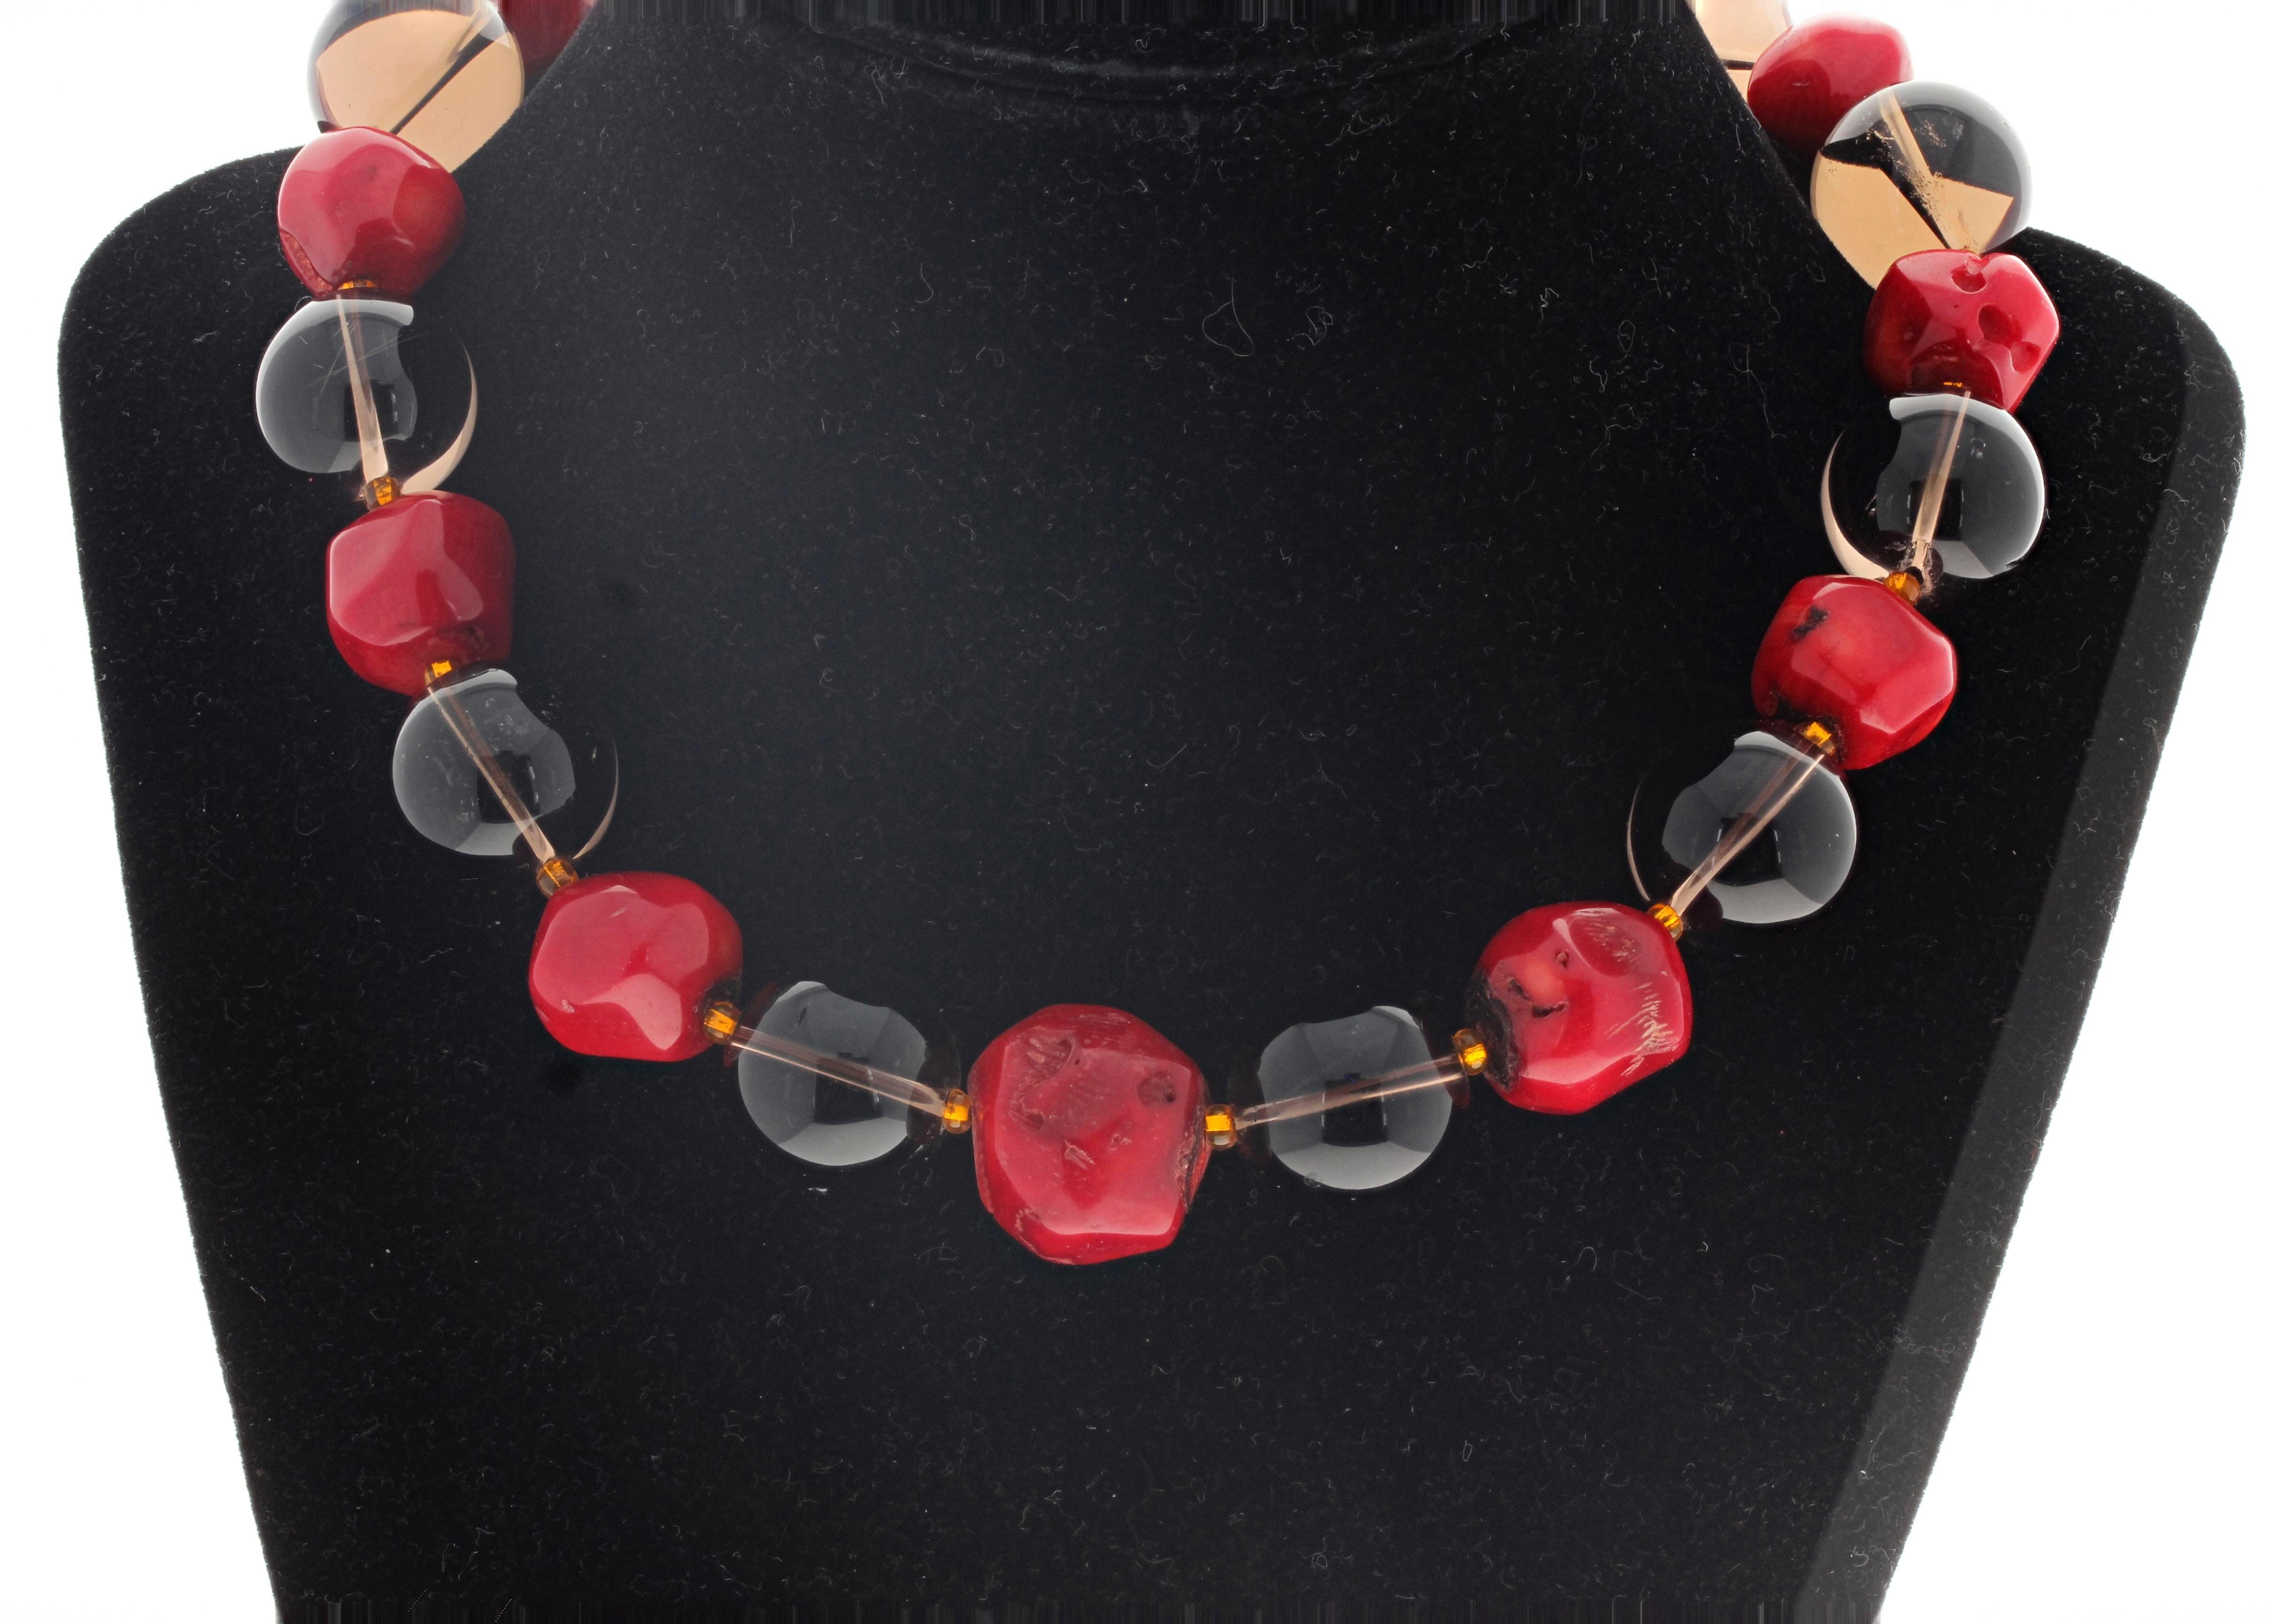 This magnificent natural Red Coral and huge big clear cleanly translucent Smoky Quartz necklace is 16 1/2 inches long.  The Smoky Quartz are 18mm round and the largest Red Coral is 19mm.  The clasp is a gold plated easy to use hook clasp. 